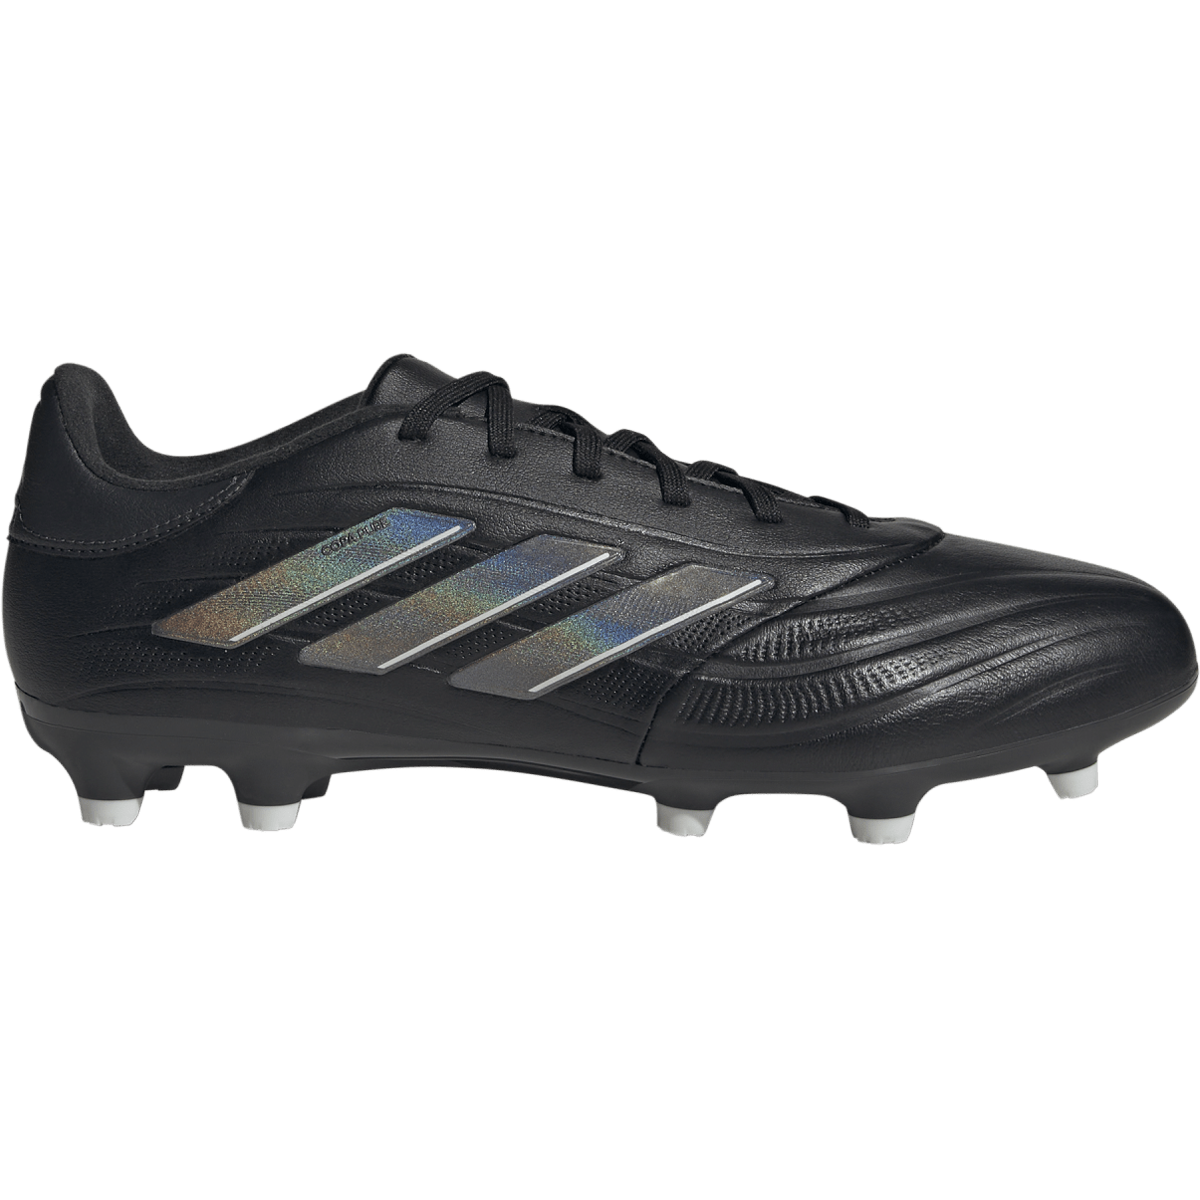 Copa Pure 2 League Firm Ground alternate view